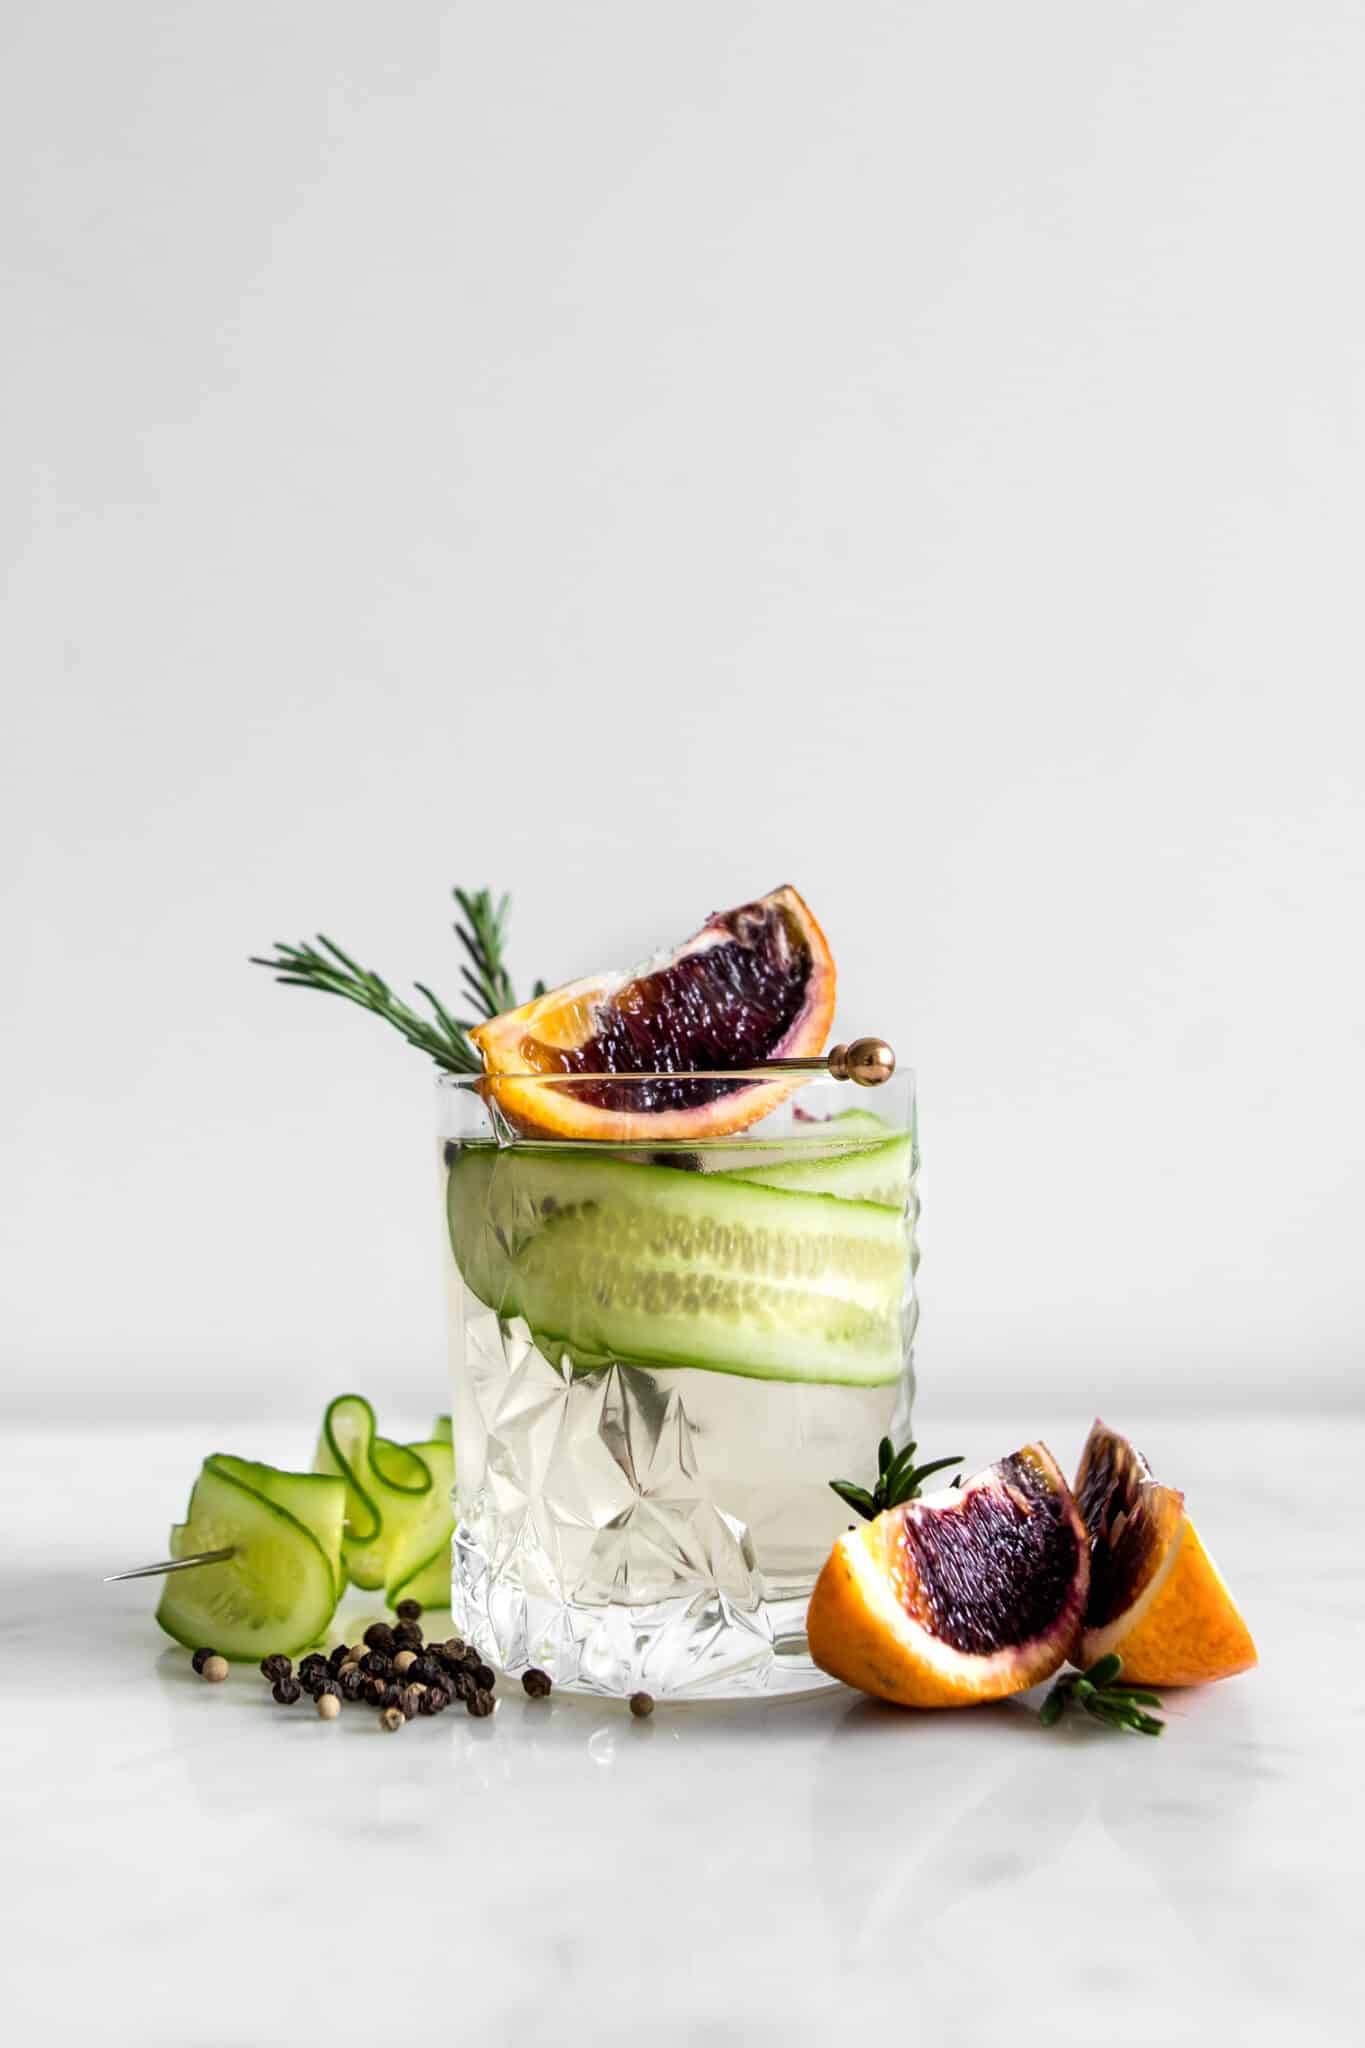 Gin and Tonic in a Crystal Glass with Cucumber, Blood Orange Wedges and Rosemary